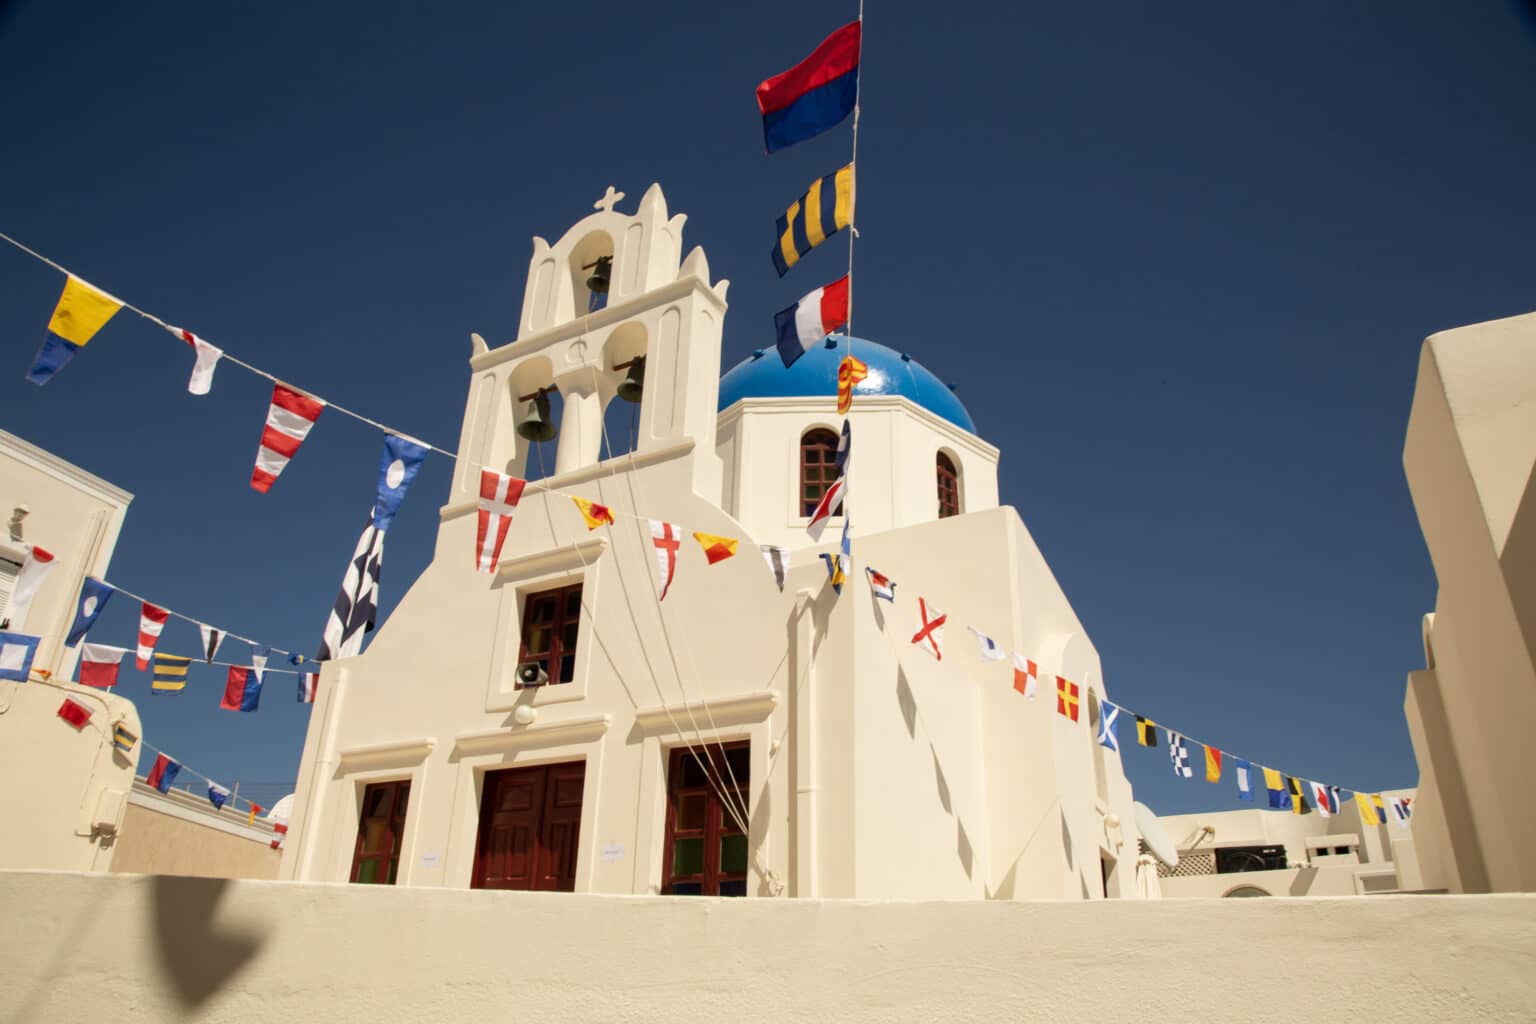 Blue dome and white church with colorful flags against a blue sky in Santorini Greece